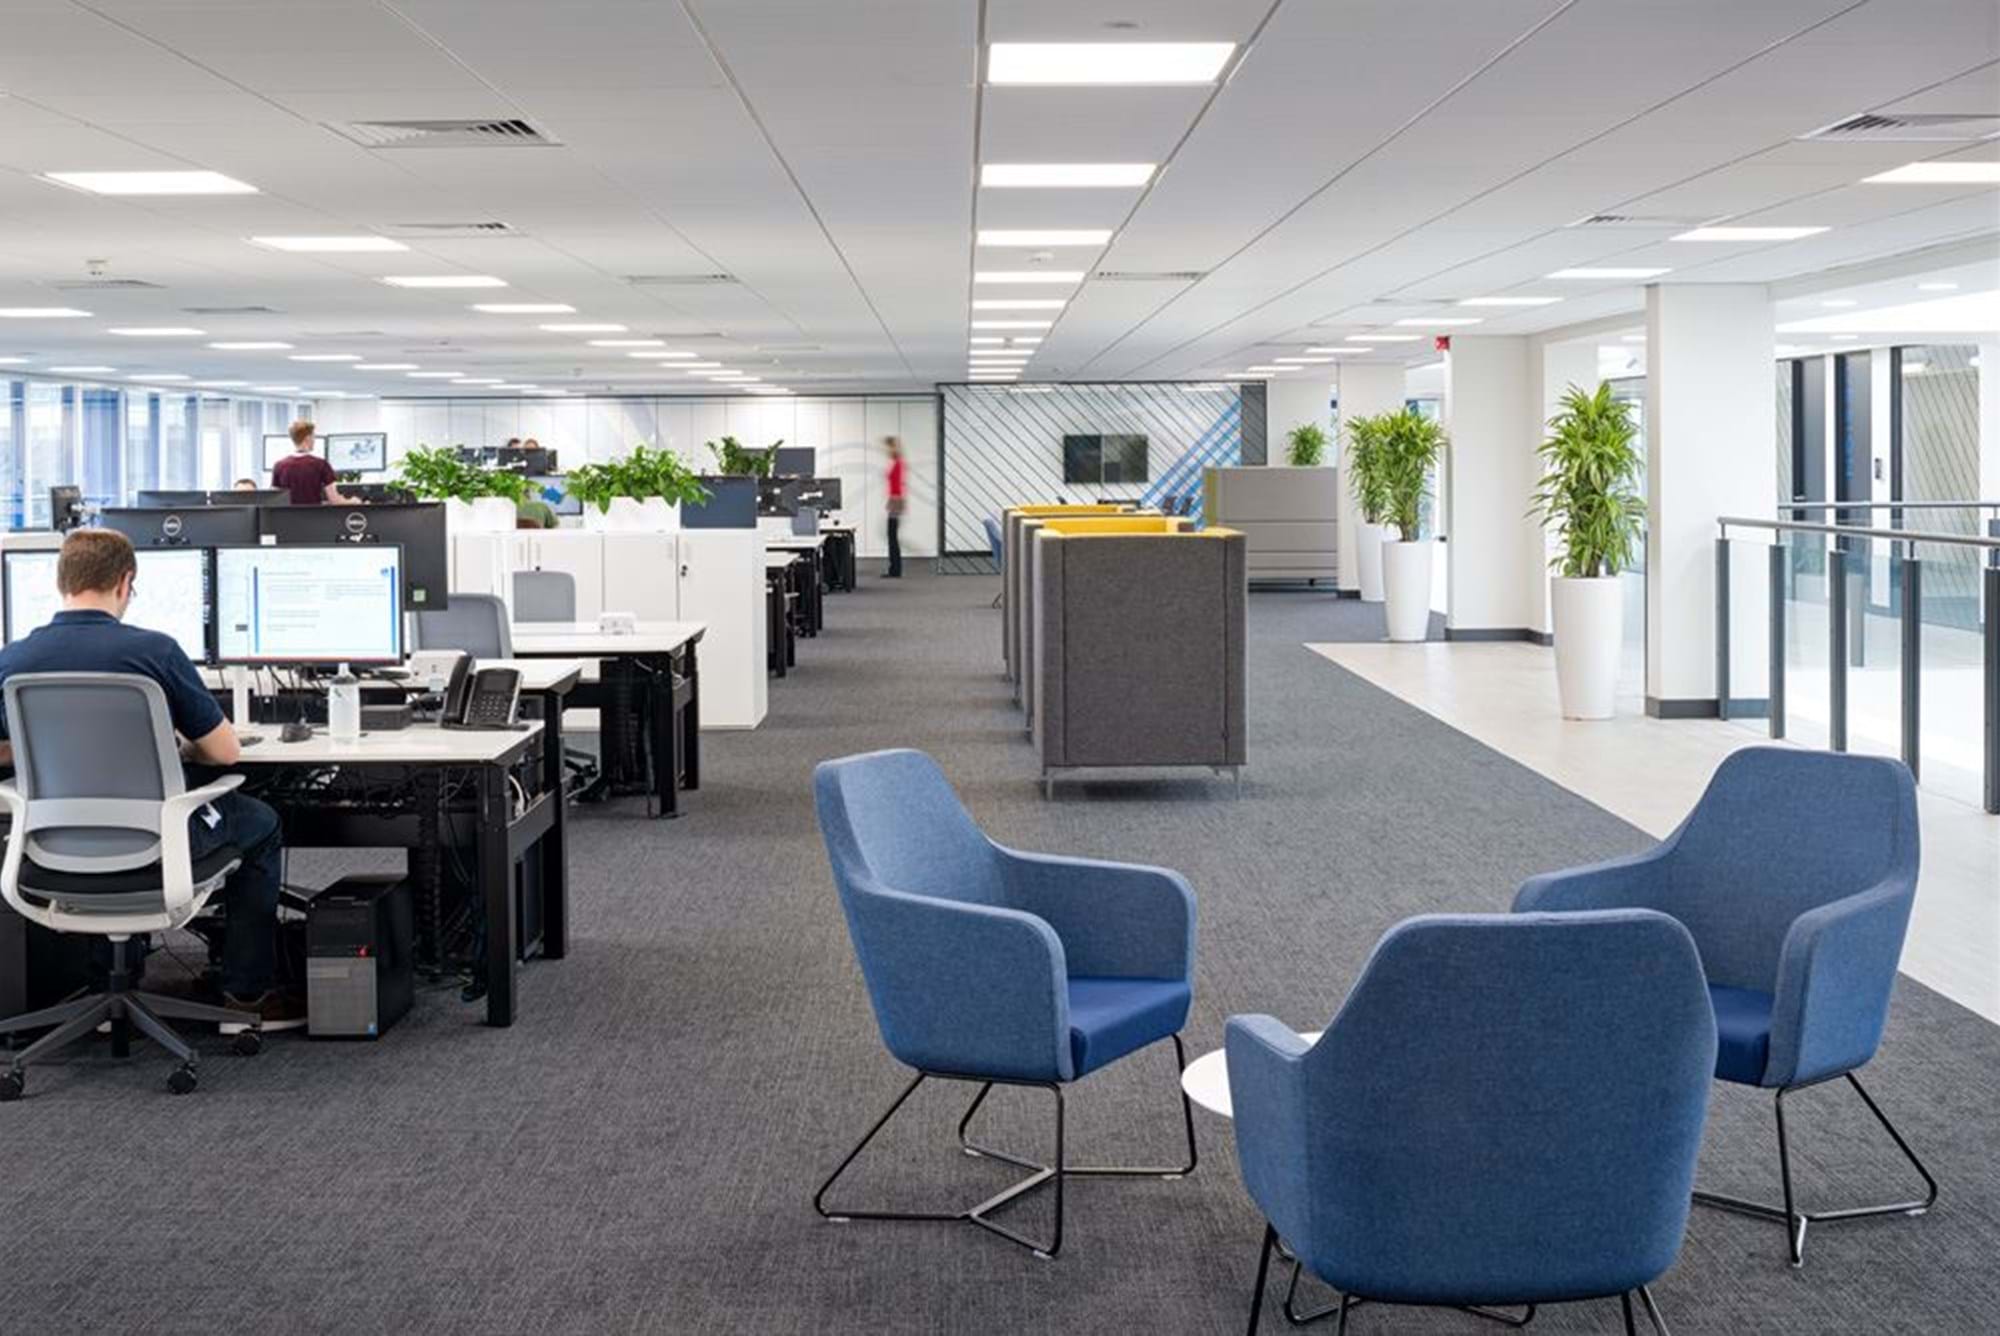 Modus Workspace office design, fit out and refurbishment - FT Technologies - FT Technologies 06 highres sRGB.jpg